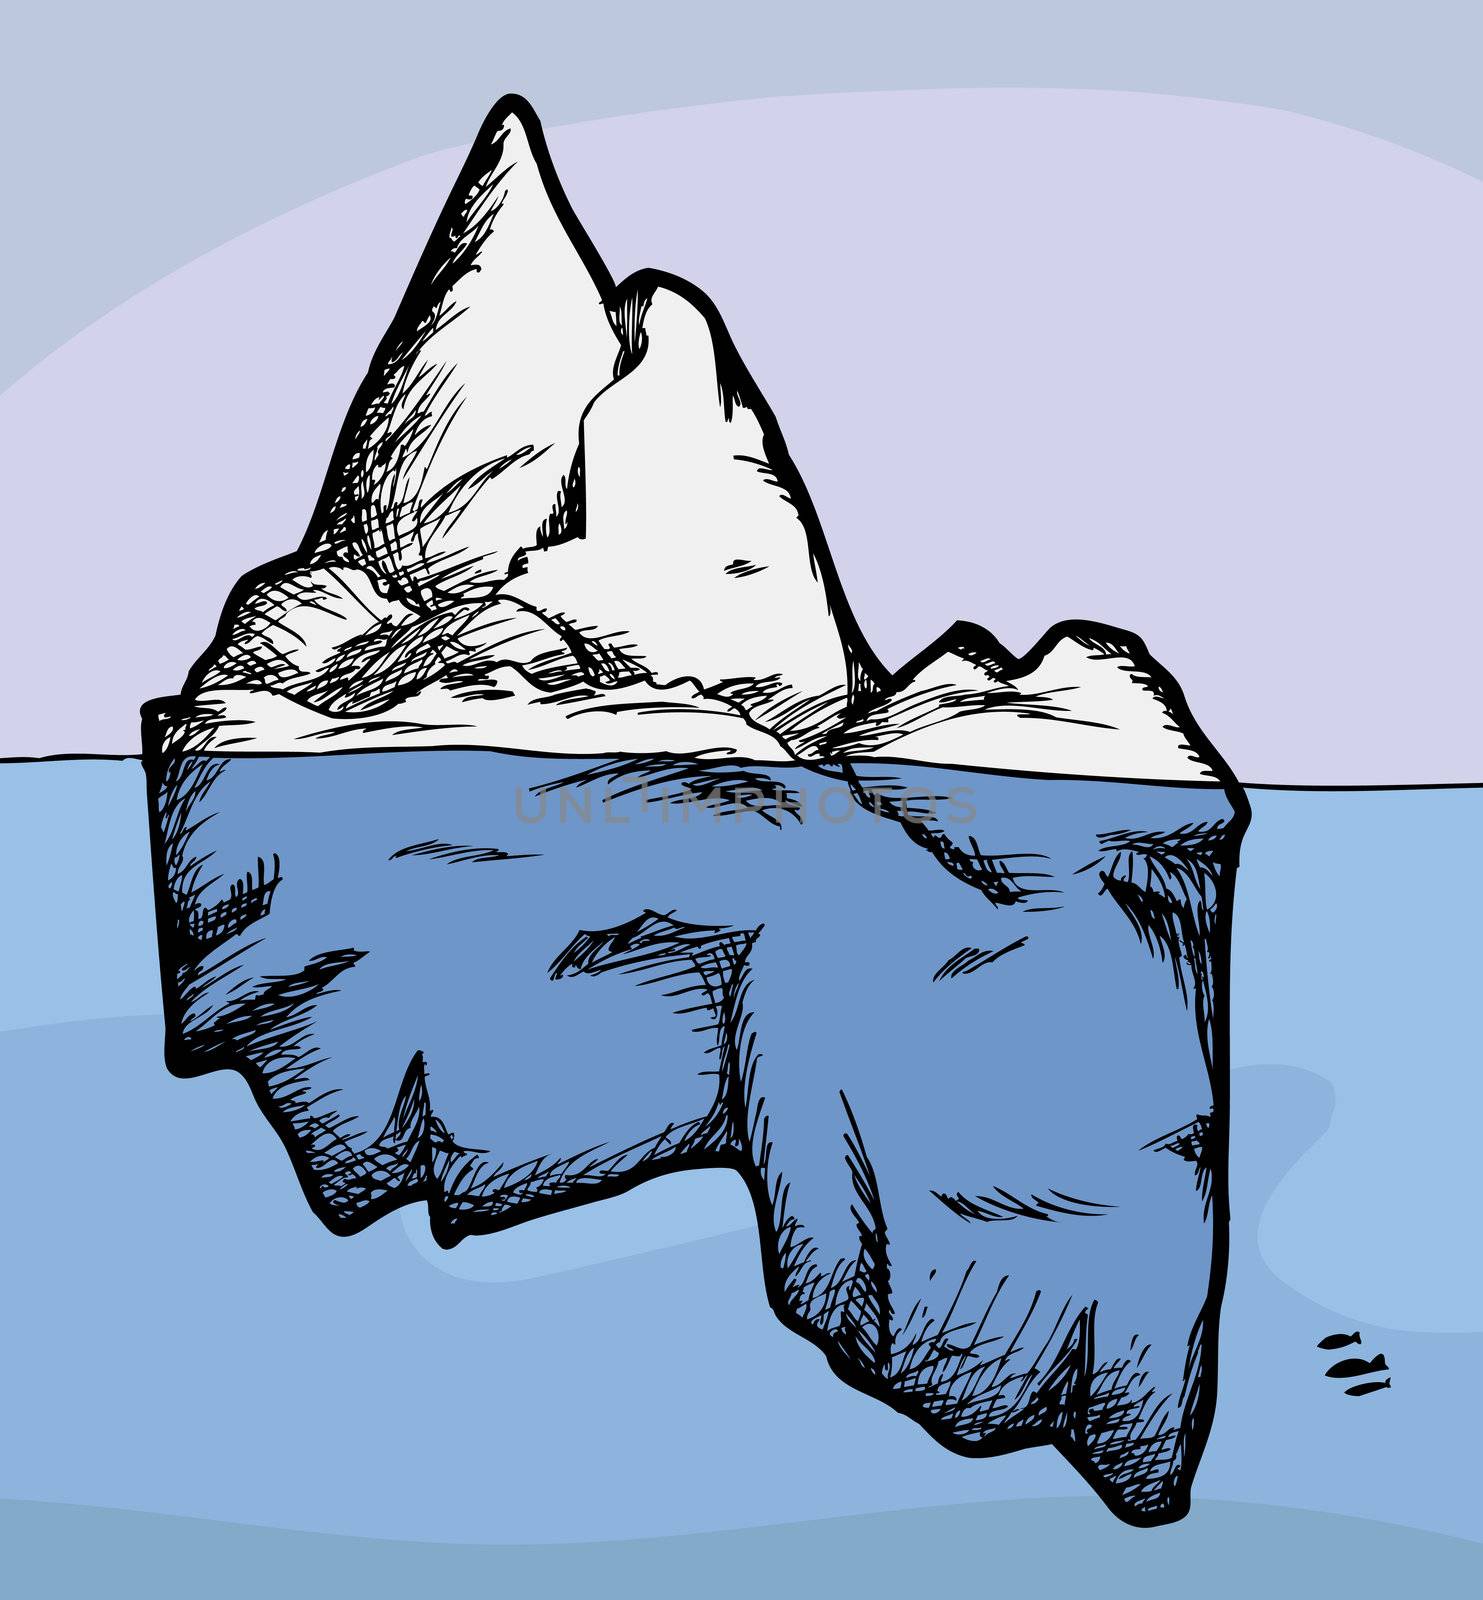 Cross section view of an iceberg above and below water